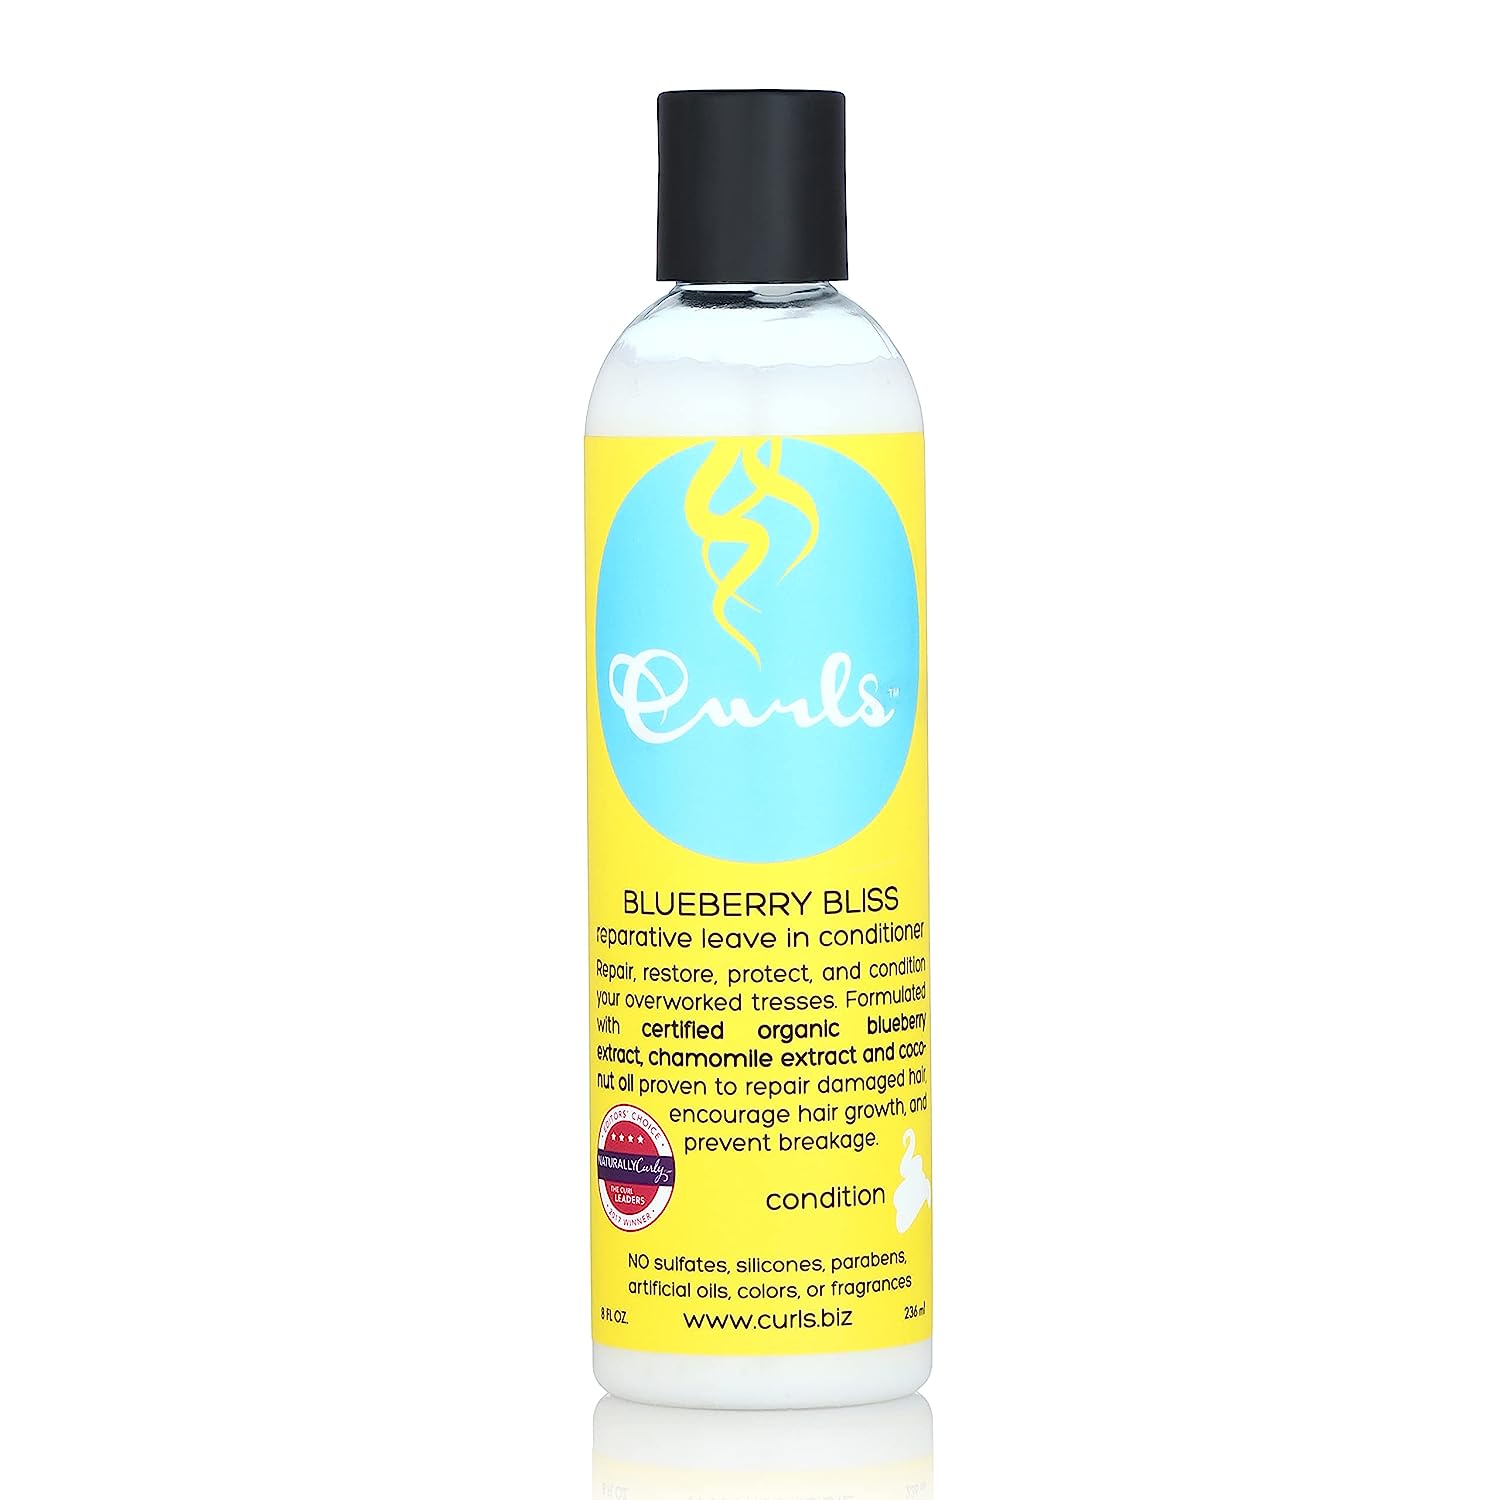 Curls Blueberry Bliss Reparative Leave In Conditioner [...]